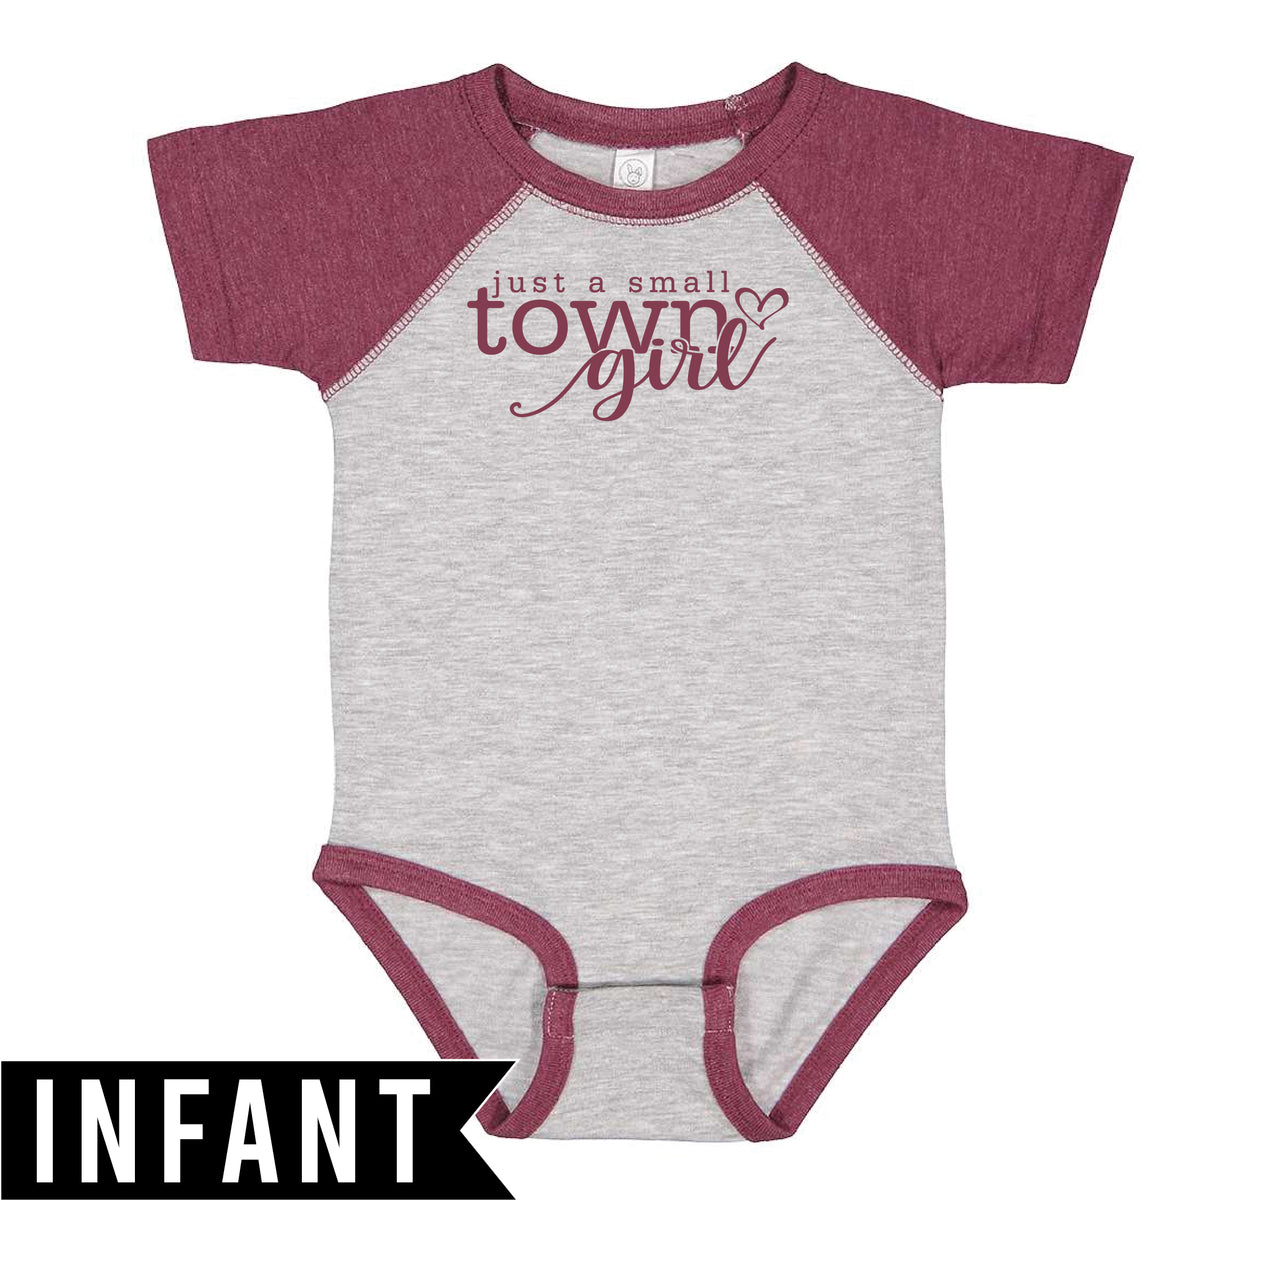 Infant Baseball Fine Jersey Bodysuit - Indiana Small Town